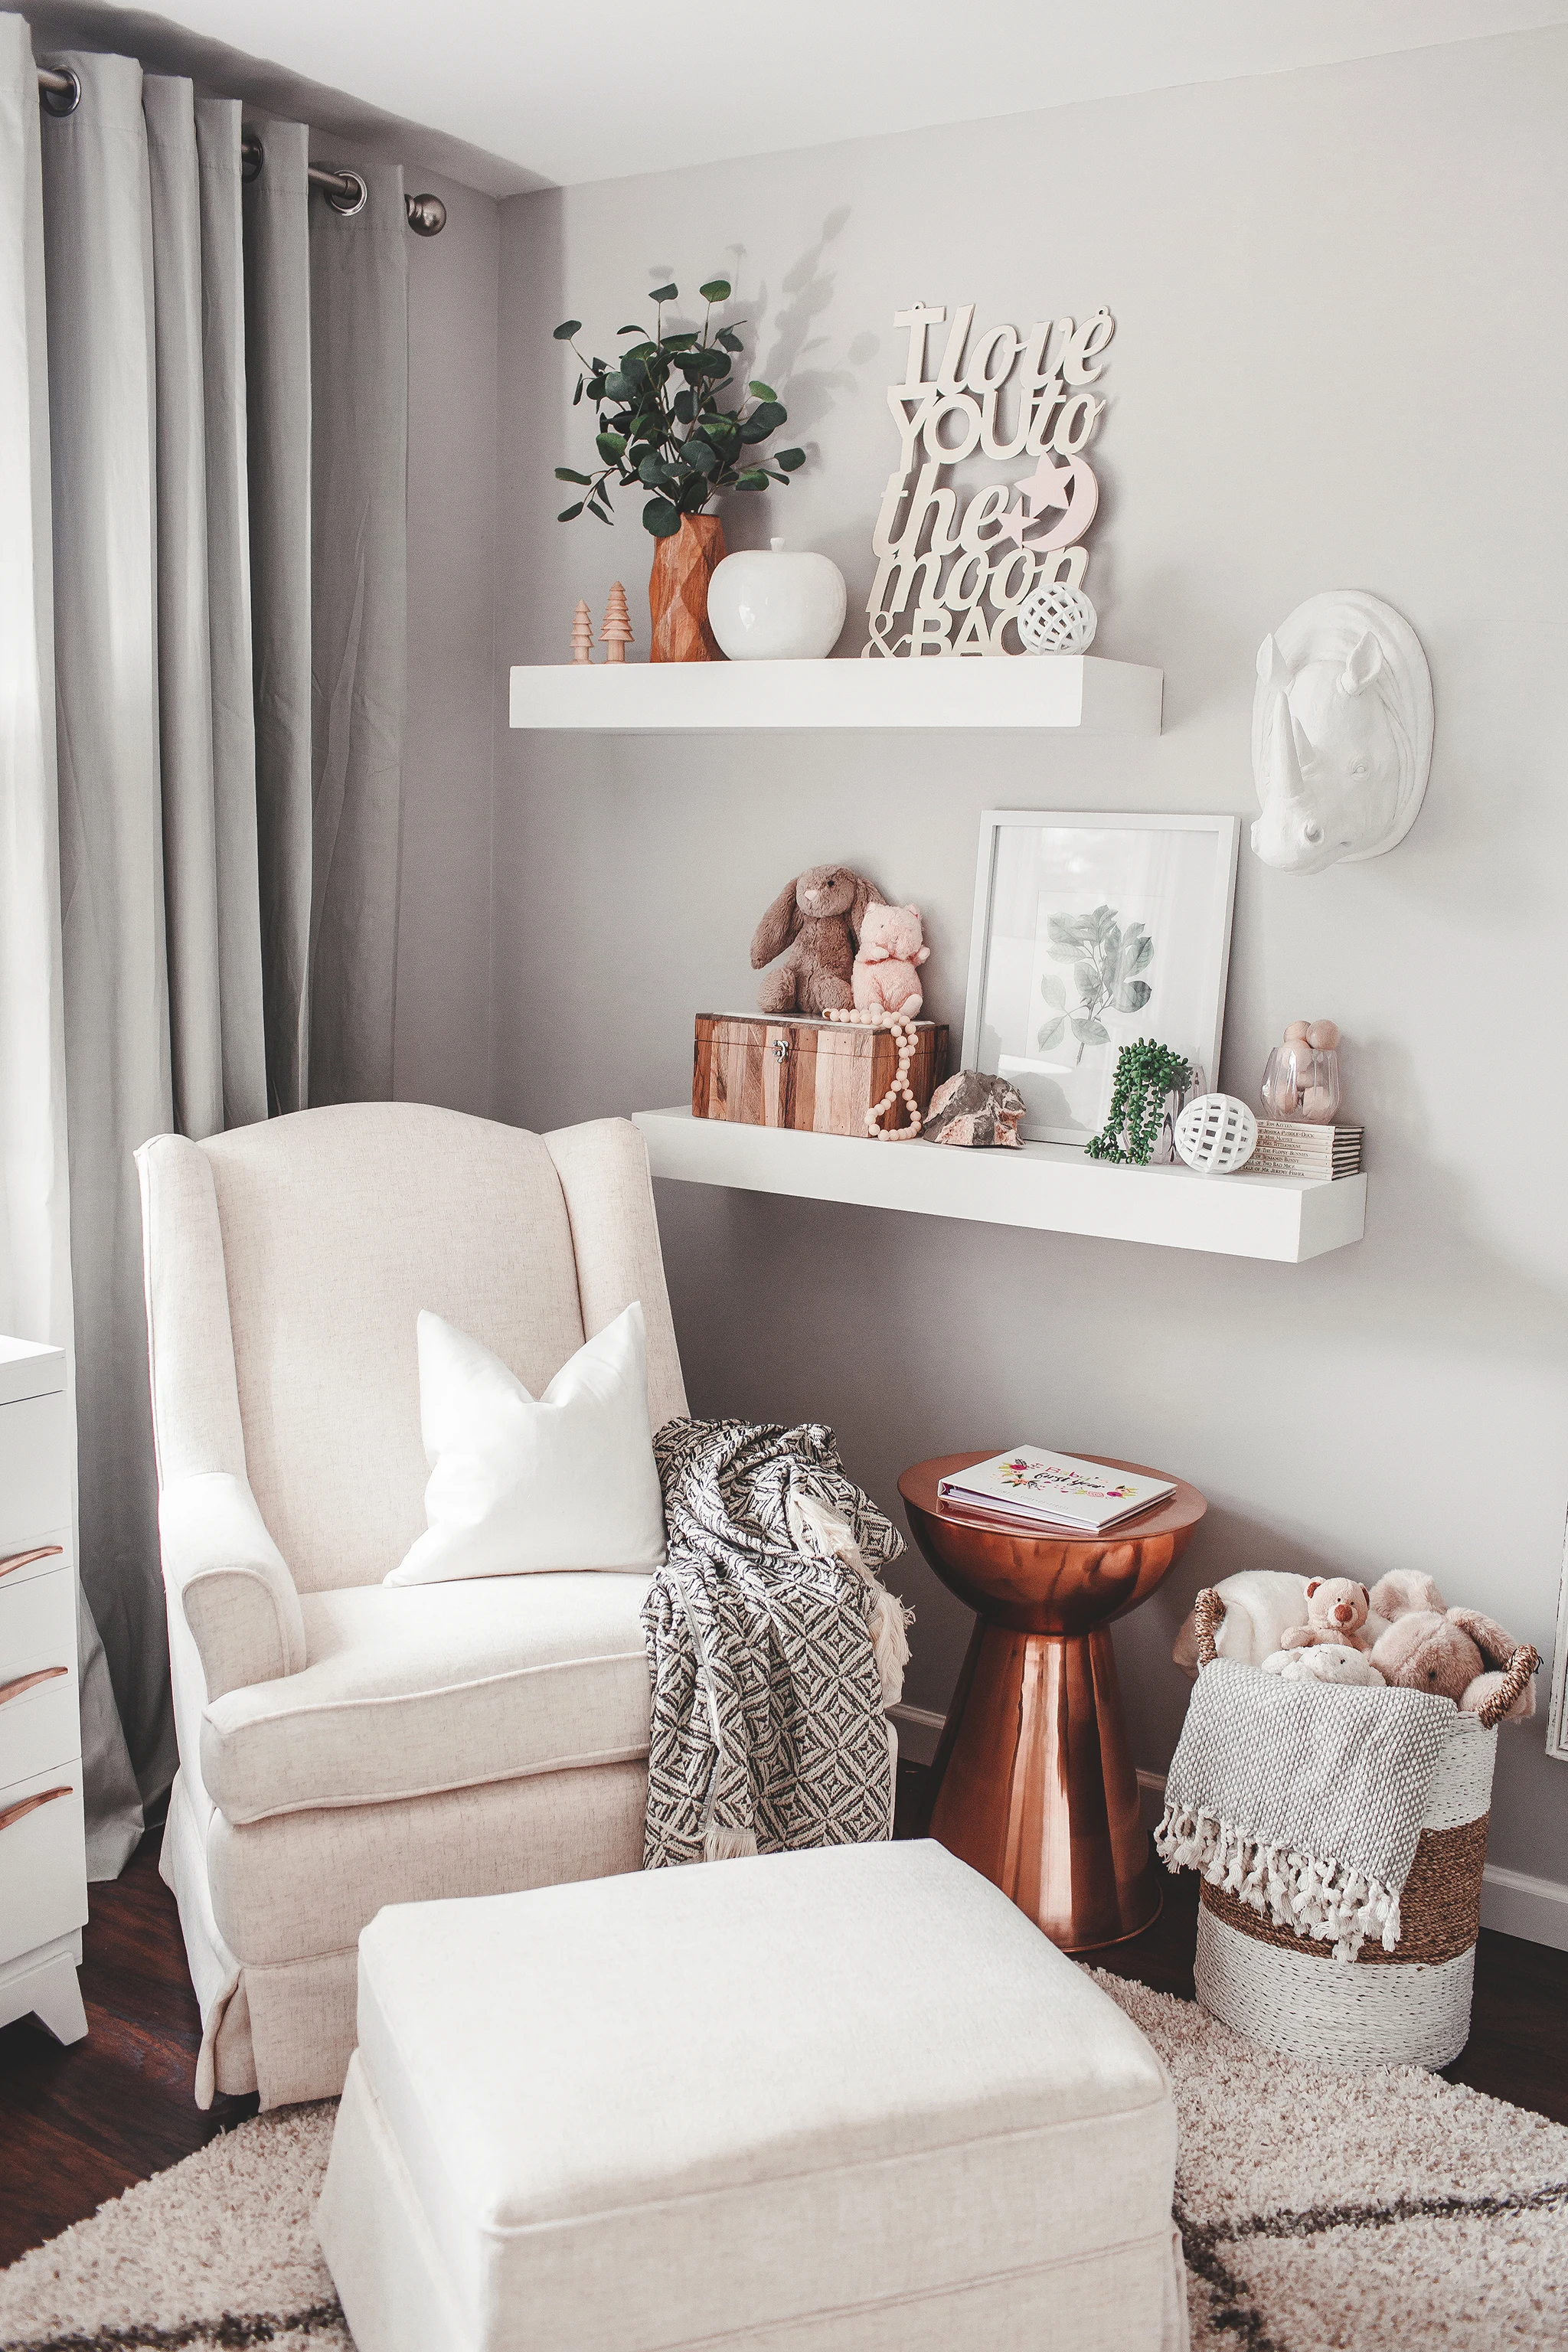 Nursing Nook in Neutral Girl's Nursery with Copper Accents - Project Nursery